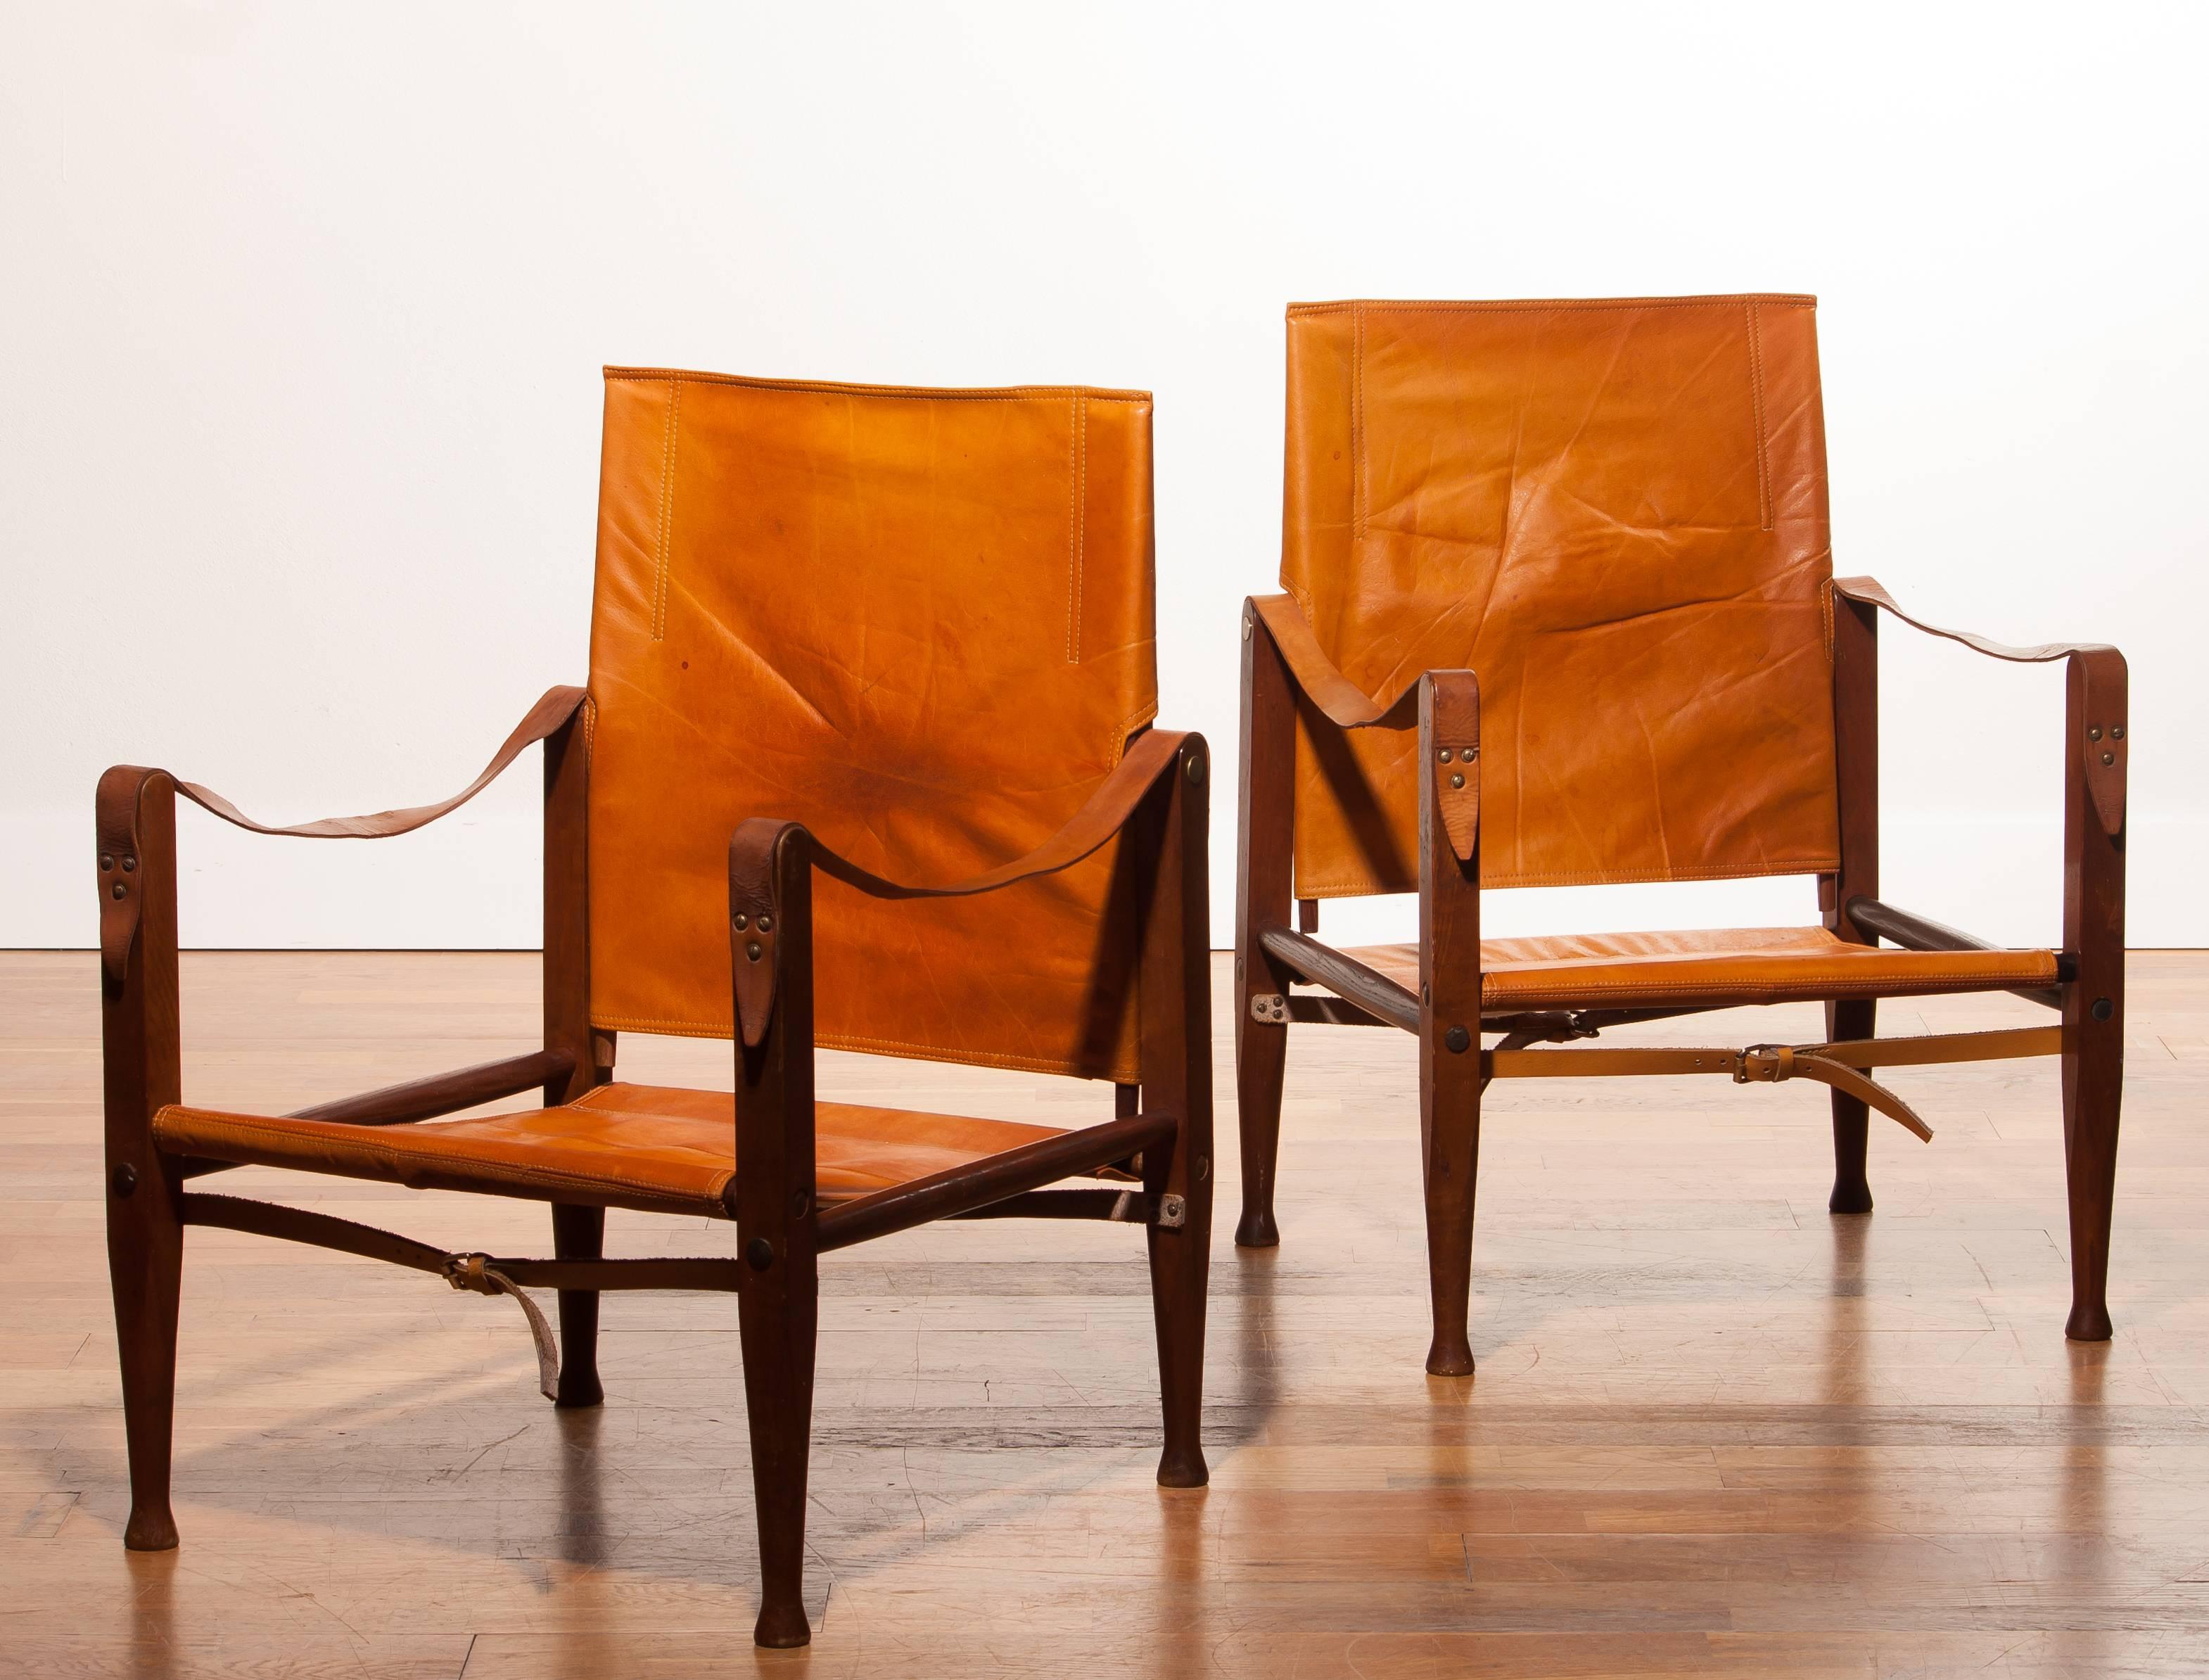 Beautiful set of Safari chairs designed by Kaare Klint for Red, Rasmussen, Denmark.
These chairs have a very nice patinated cognac leather seating on a wooden frame.
They are in a good condition with few signs of age related wear.
Period